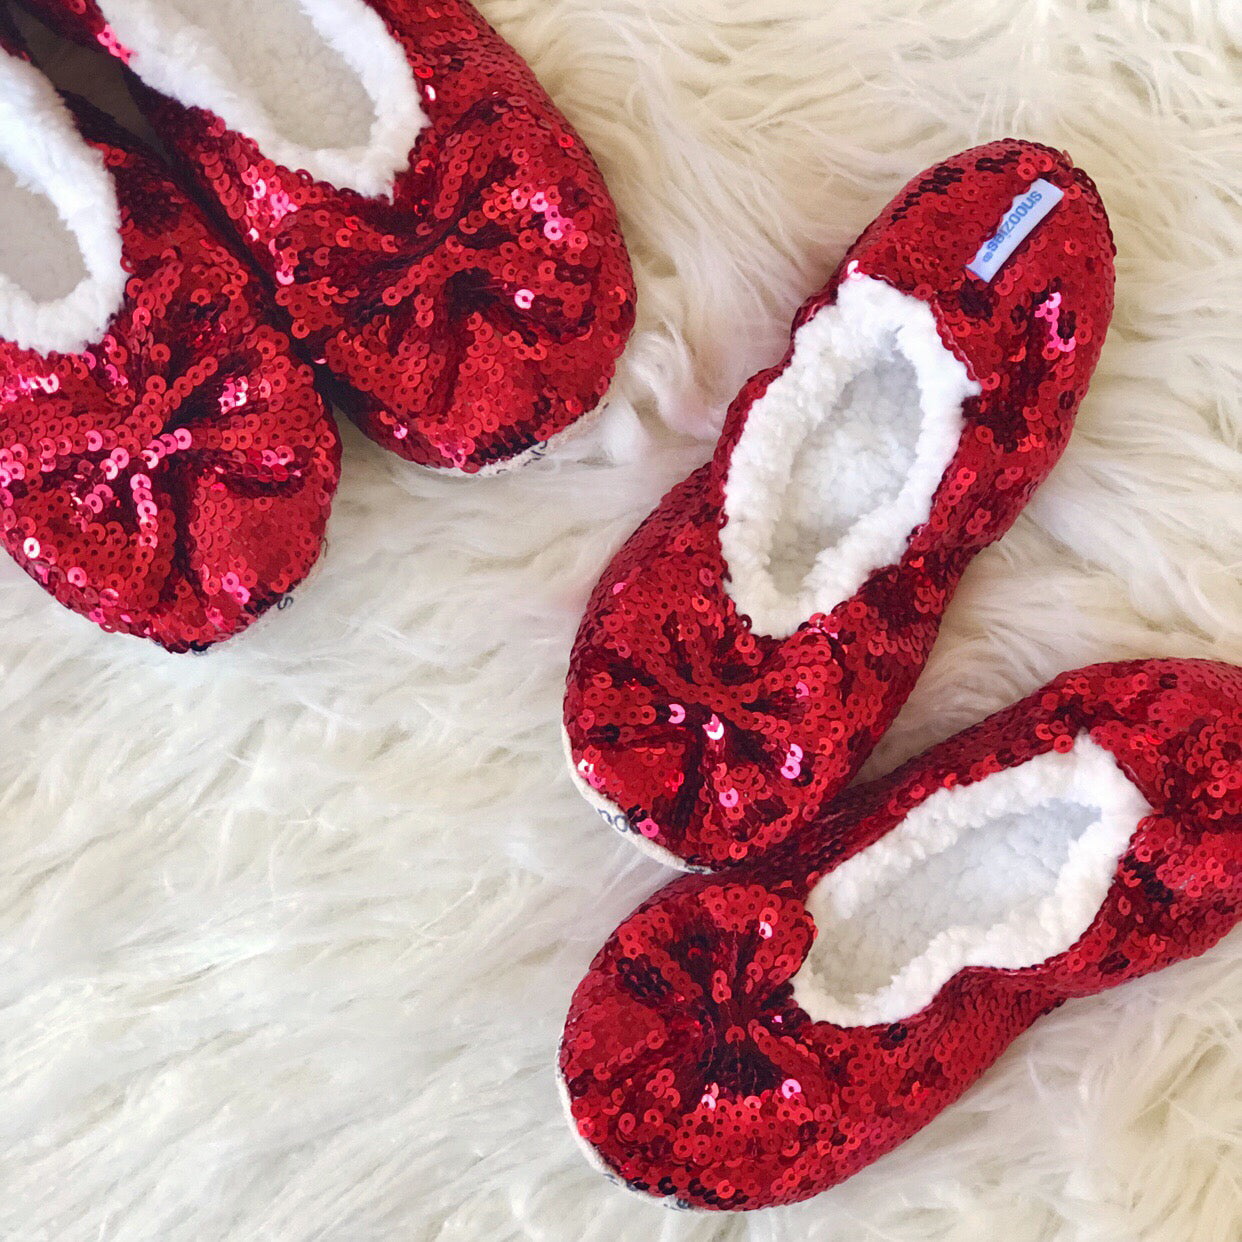 Mommy and Me Matching Red Slippers by Snoozies